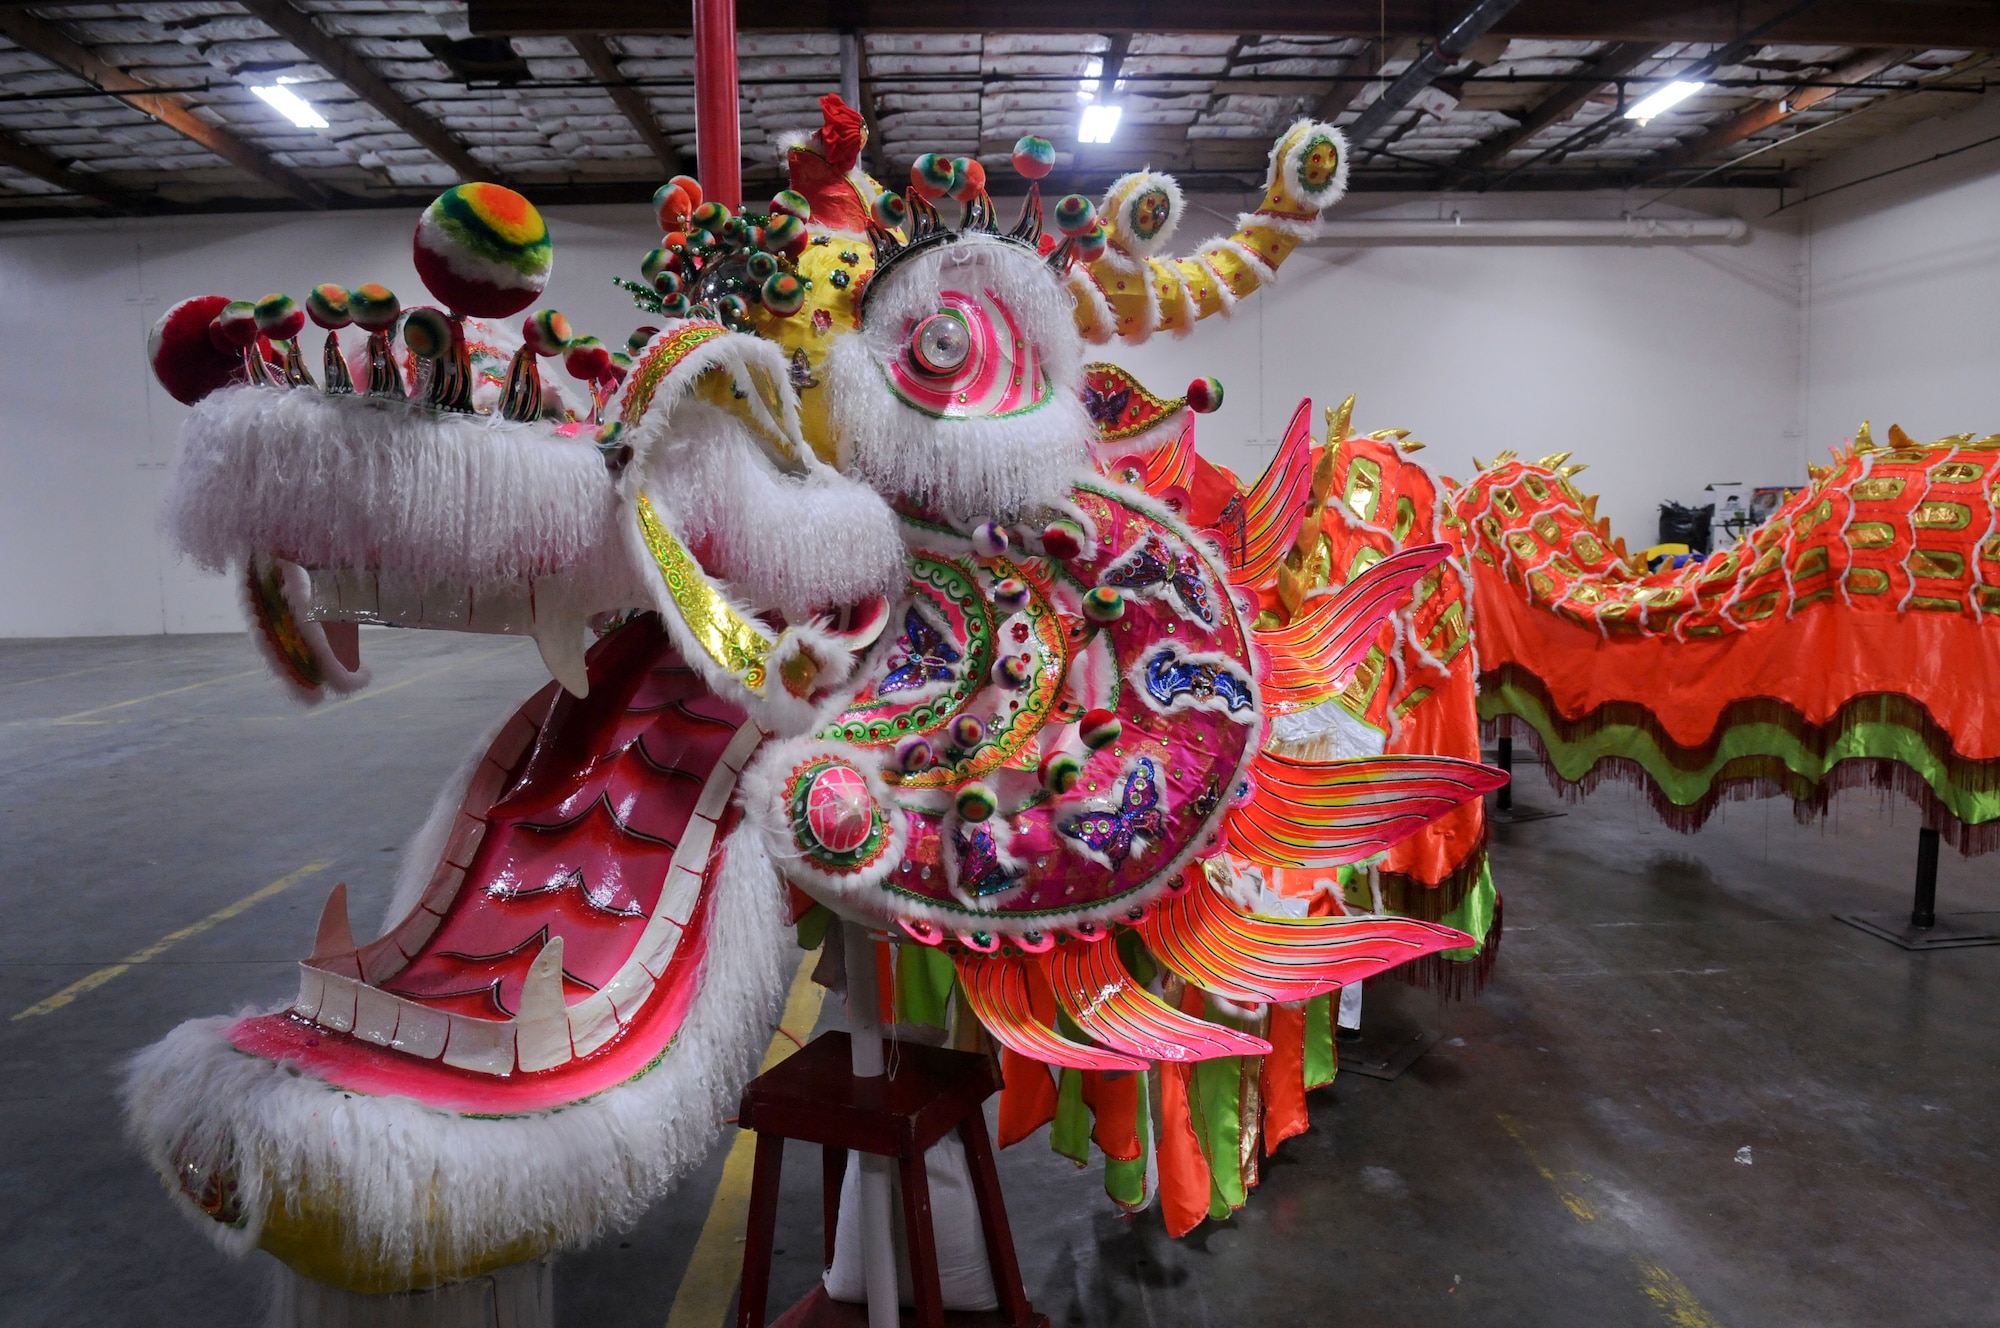 The “Hong Wan Lung” Dragon sits on a pedestal in Marysville, California, Mar. 12, 2016. The handmade dragon was created in China and donated to the city of Marysville. It is 175ft long, with the head weighing more than 60 pounds. 